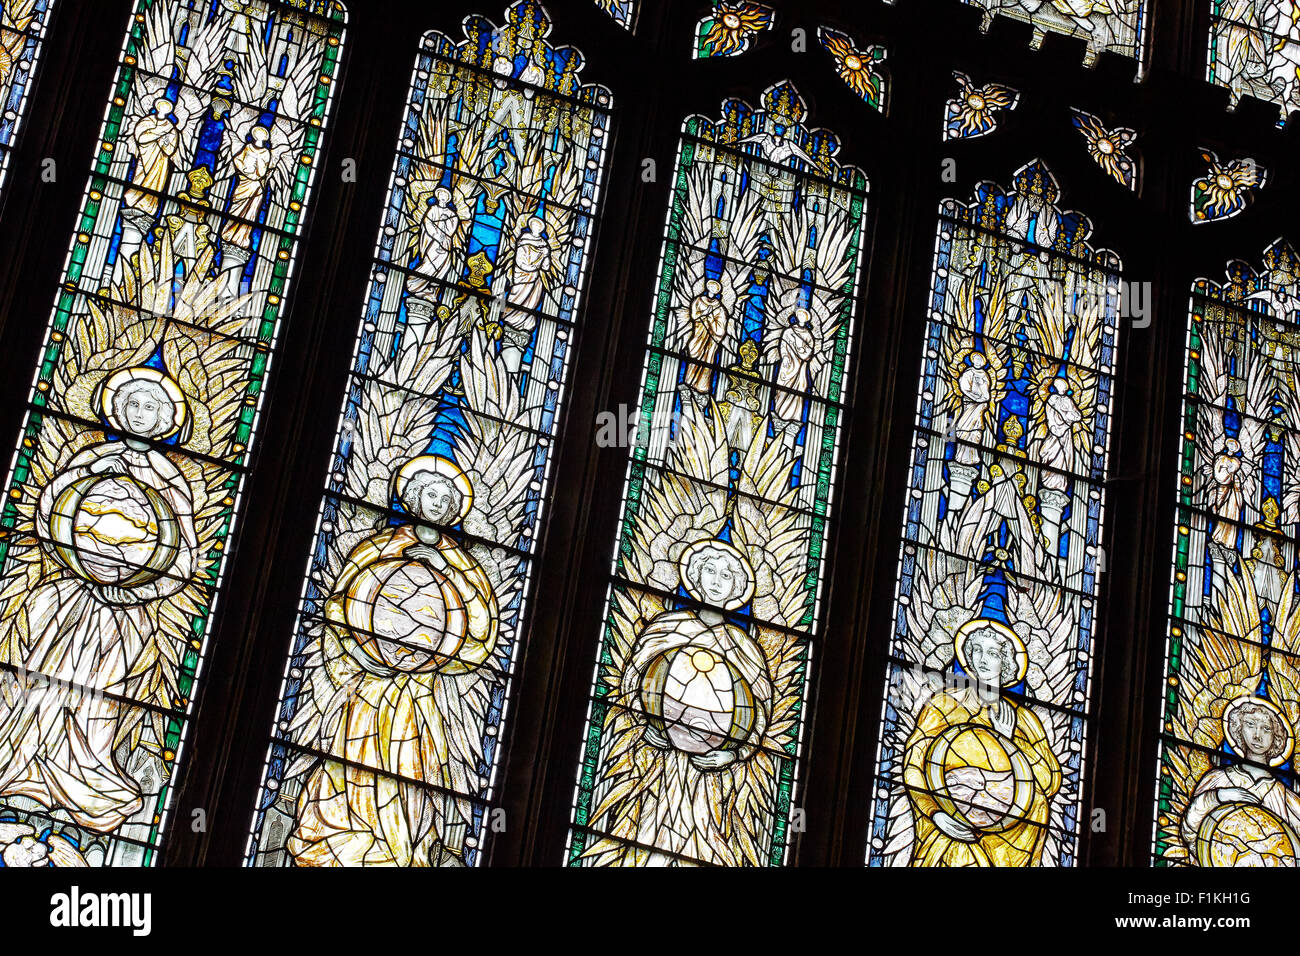 Section of a large stained glass window in Southwell Minster, Southwell, Nottingham, England. Stock Photo